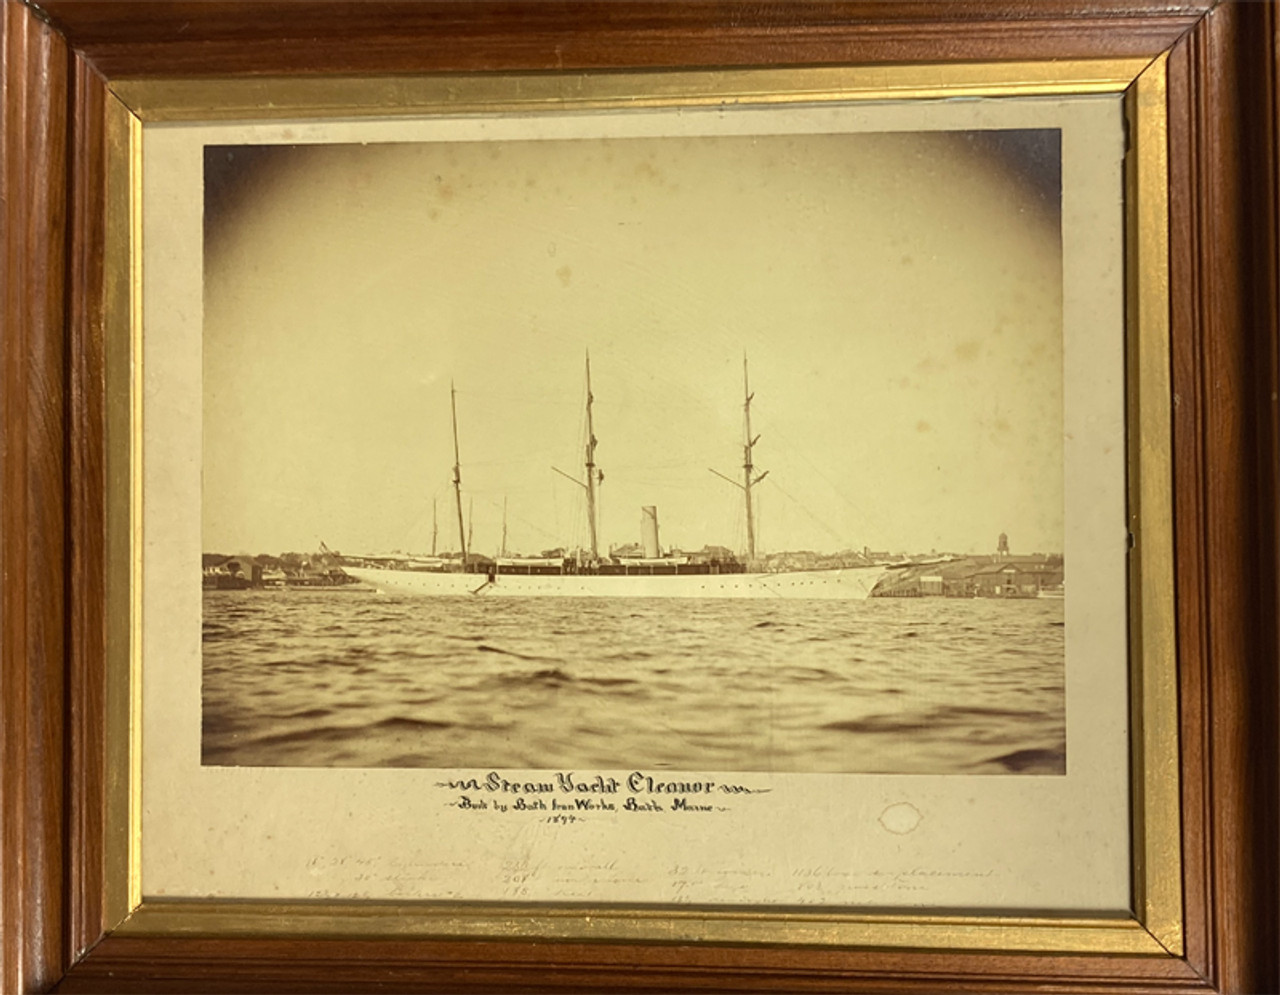 Steam Yacht Eleanor by unknown 1894 original antique photograph on board